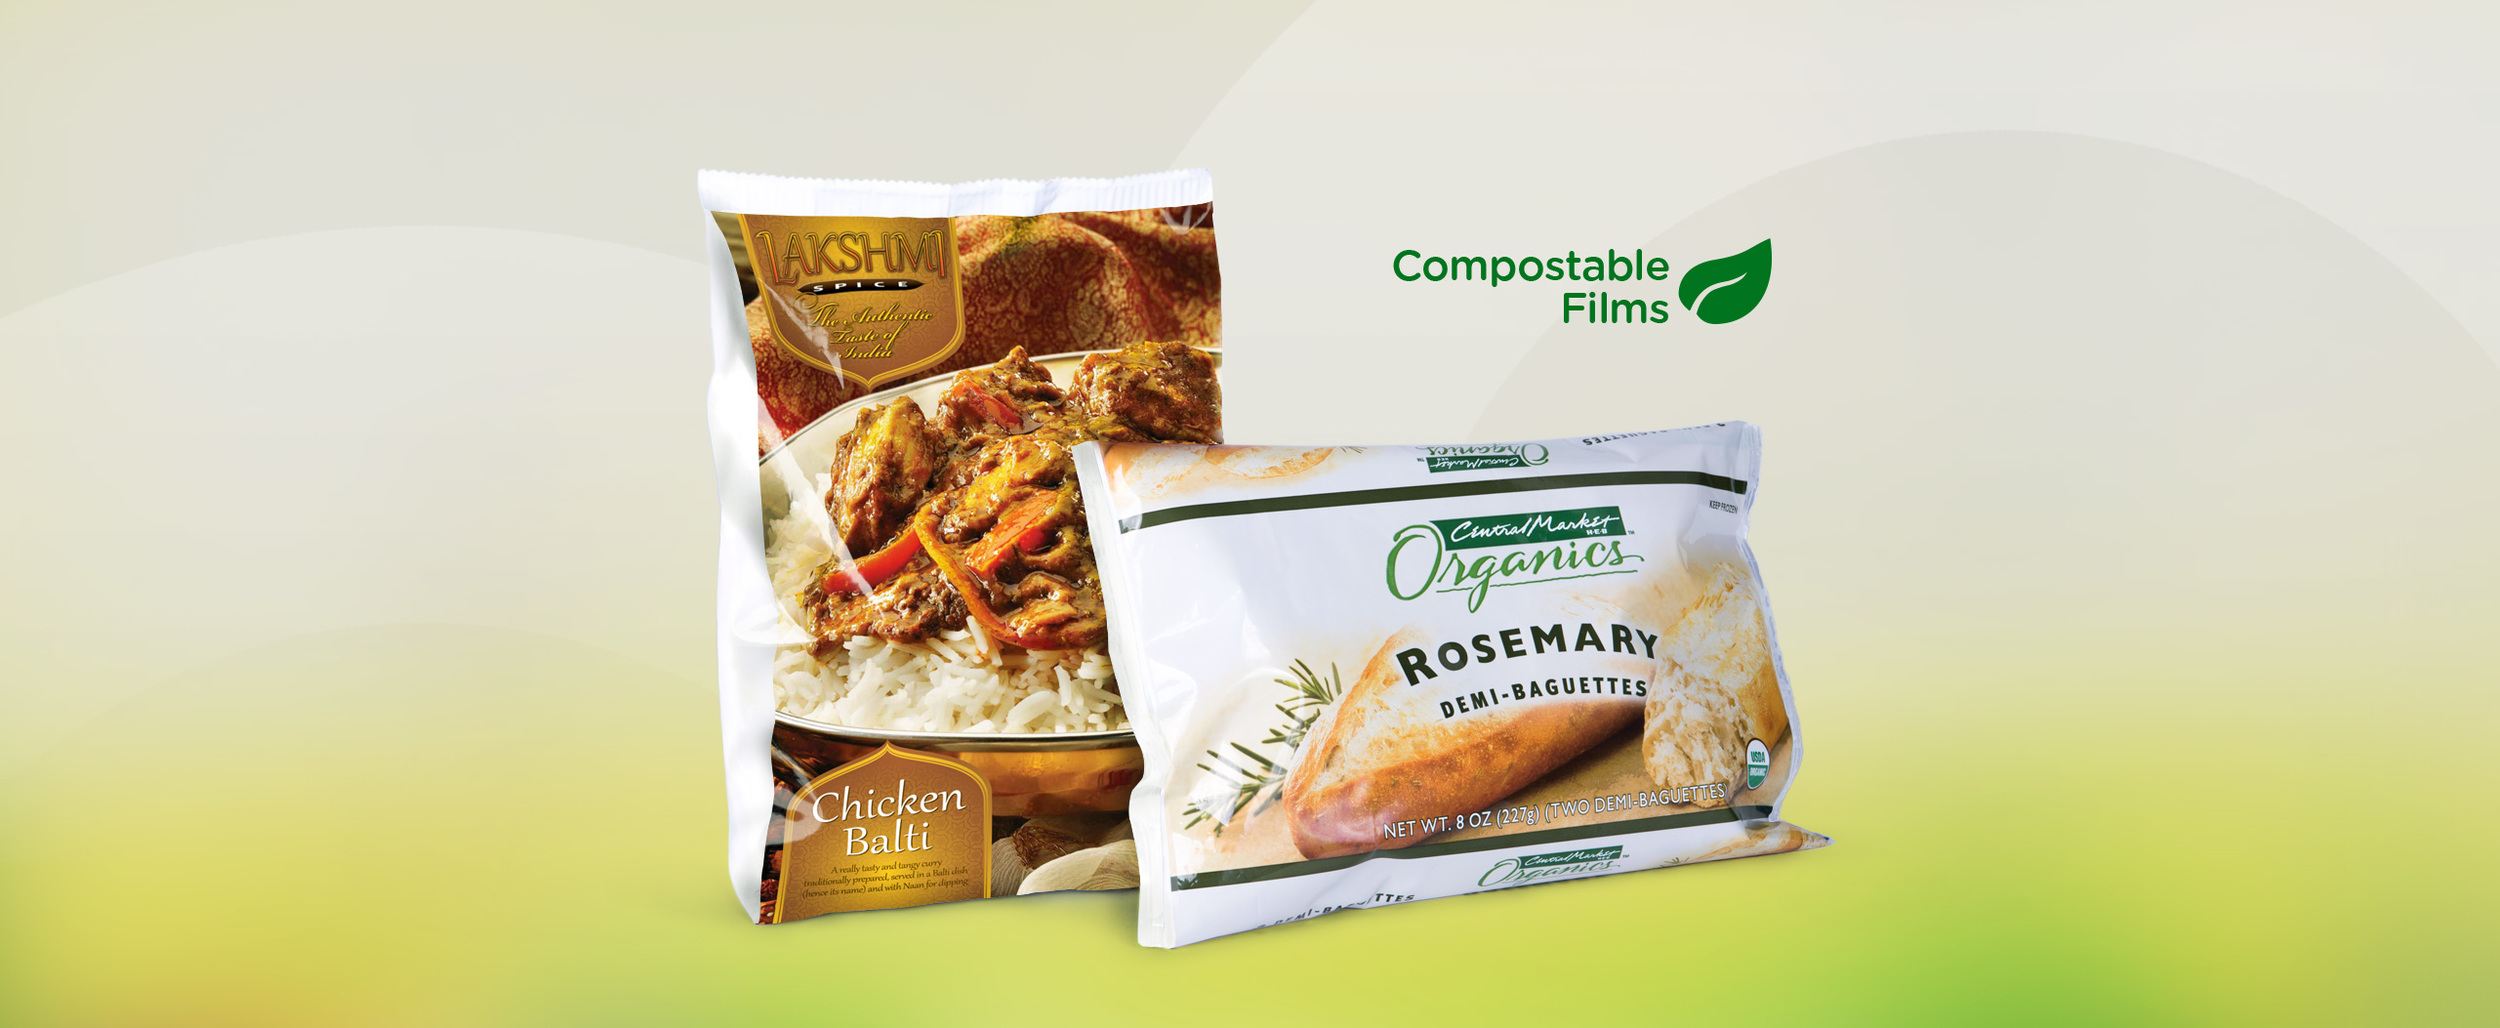 Package of Chicken Balti and Rosemary Demi-Baguettes products with caption reading "Compostable Films"